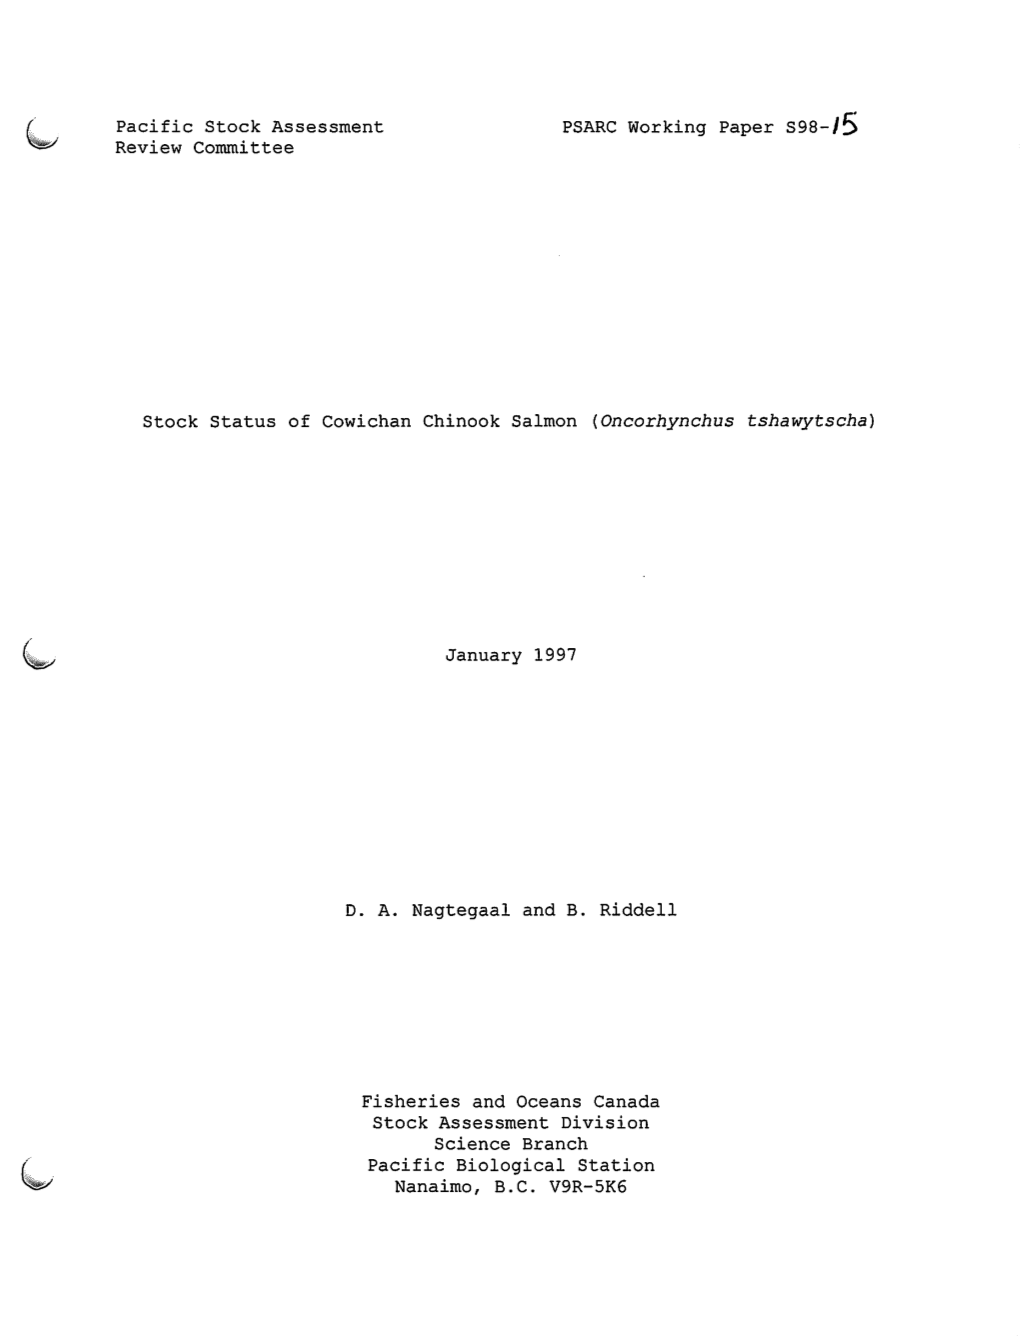 Pacific Stock Assessment Review Committee (PSARC) Annual Report for 1989